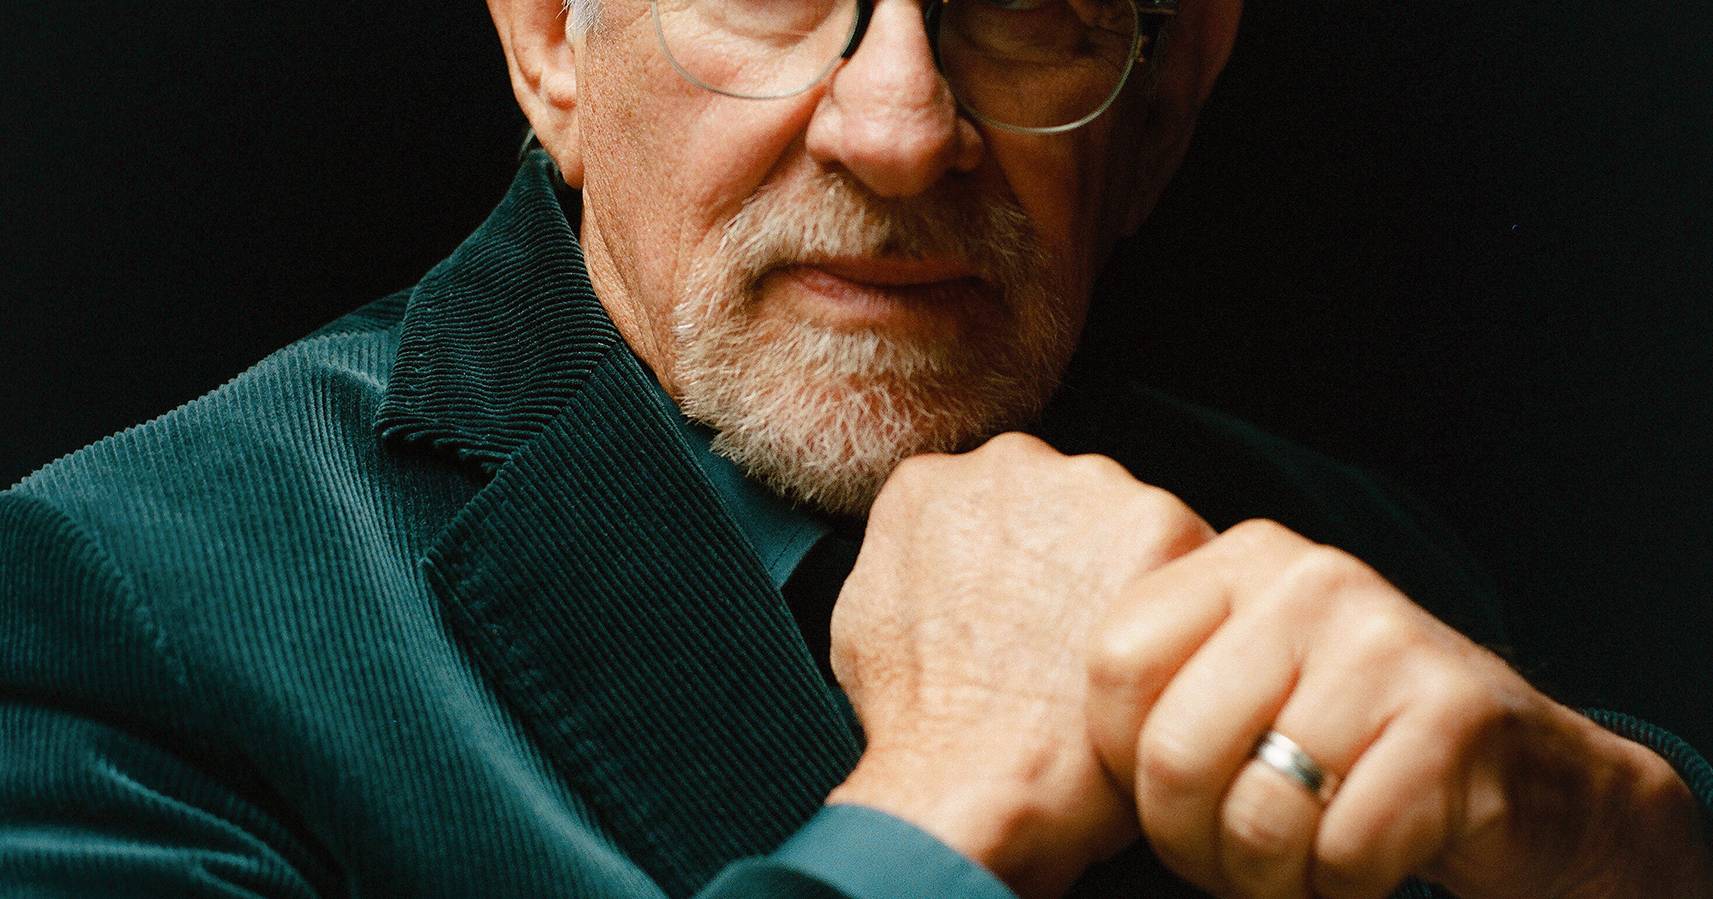 Great interview with Steven Spielberg: “Being Jewish in America is not the same as in Hollywood”